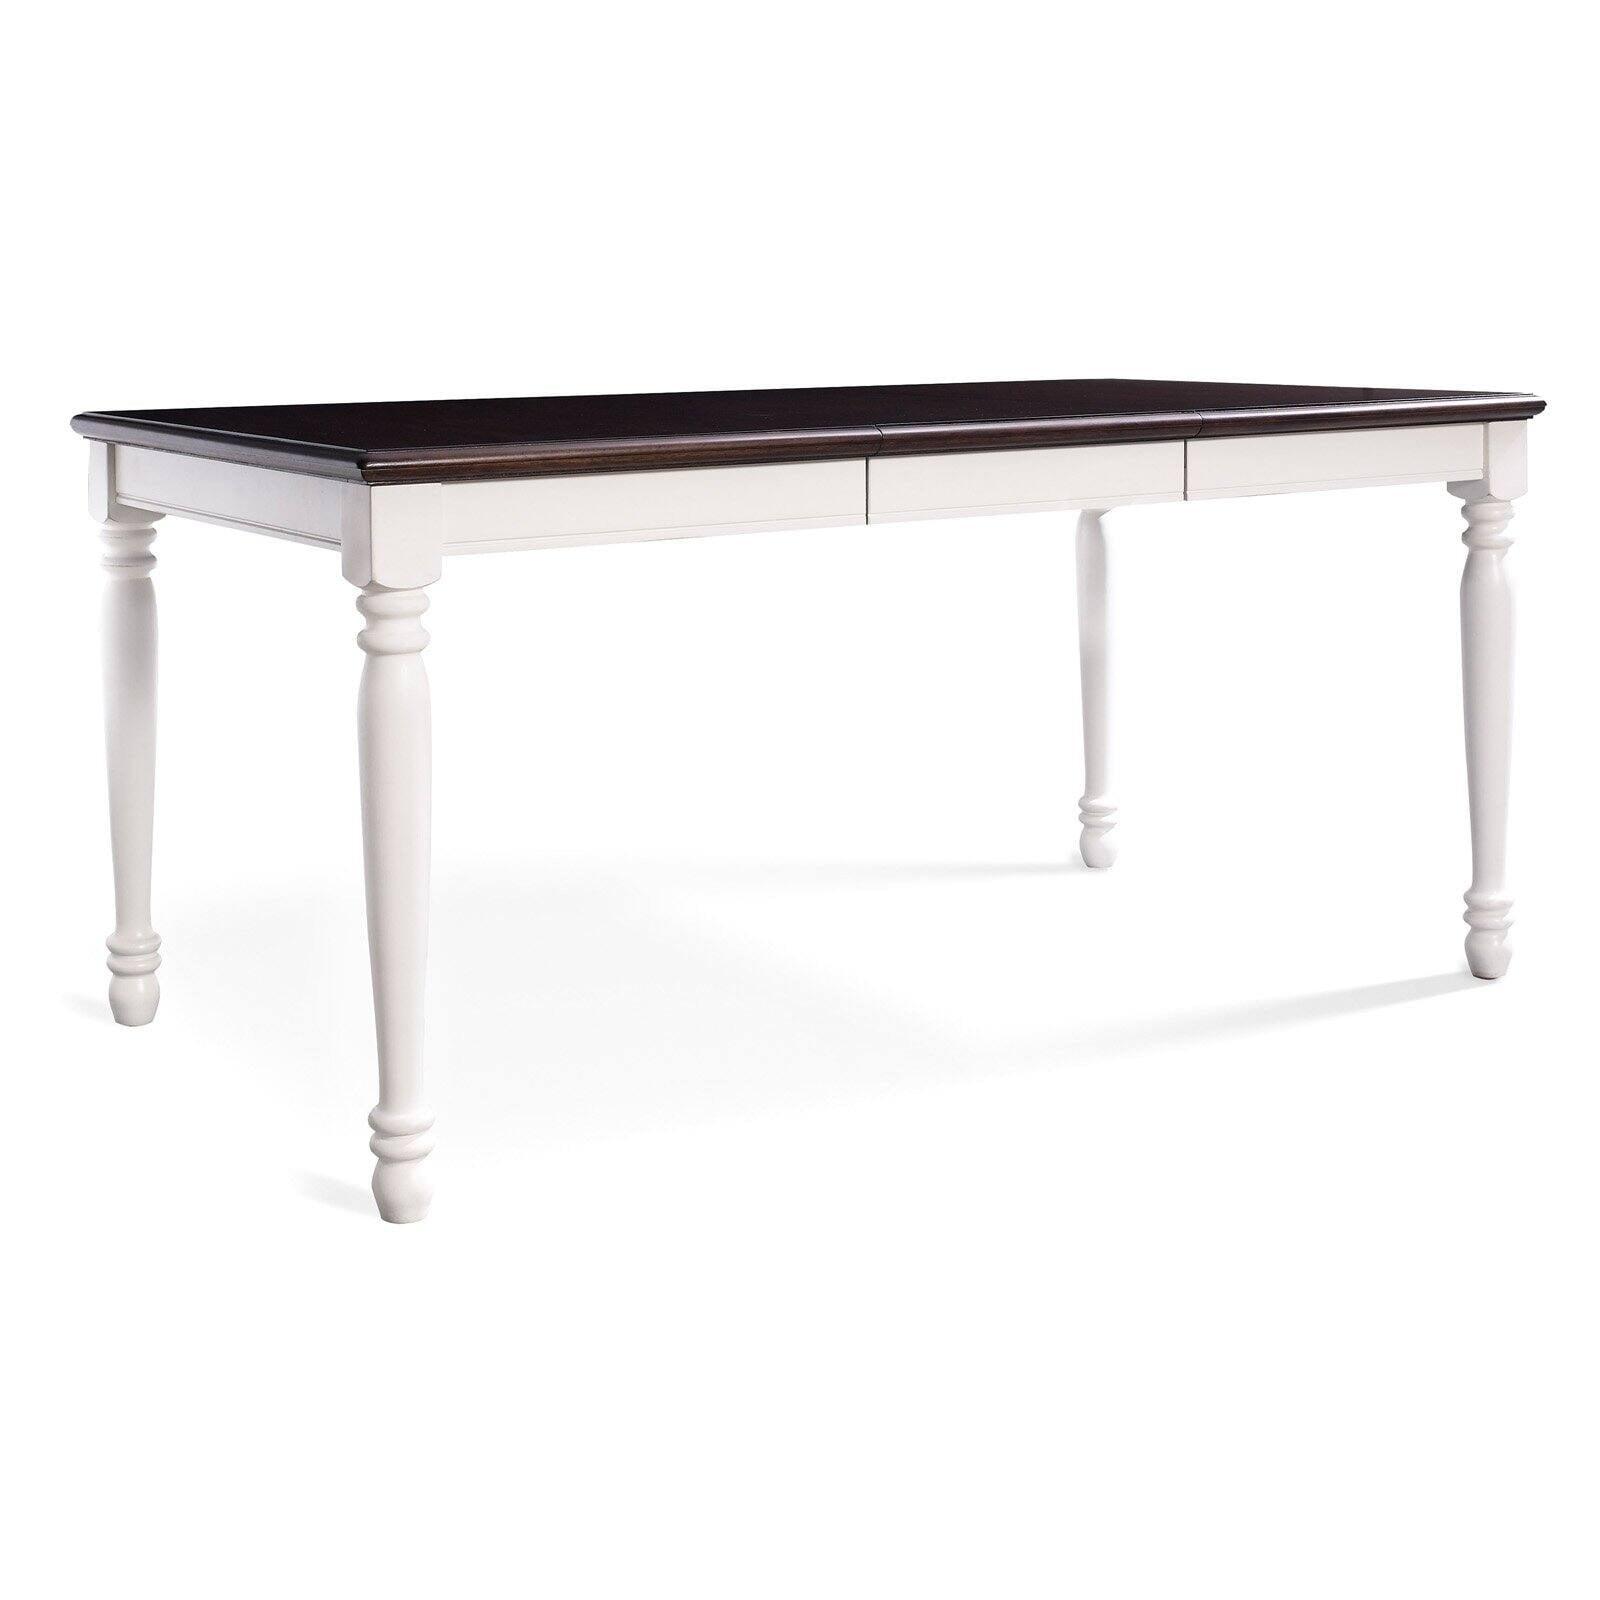 Shelby Extendable Solid Hardwood Dining Table in Antique White